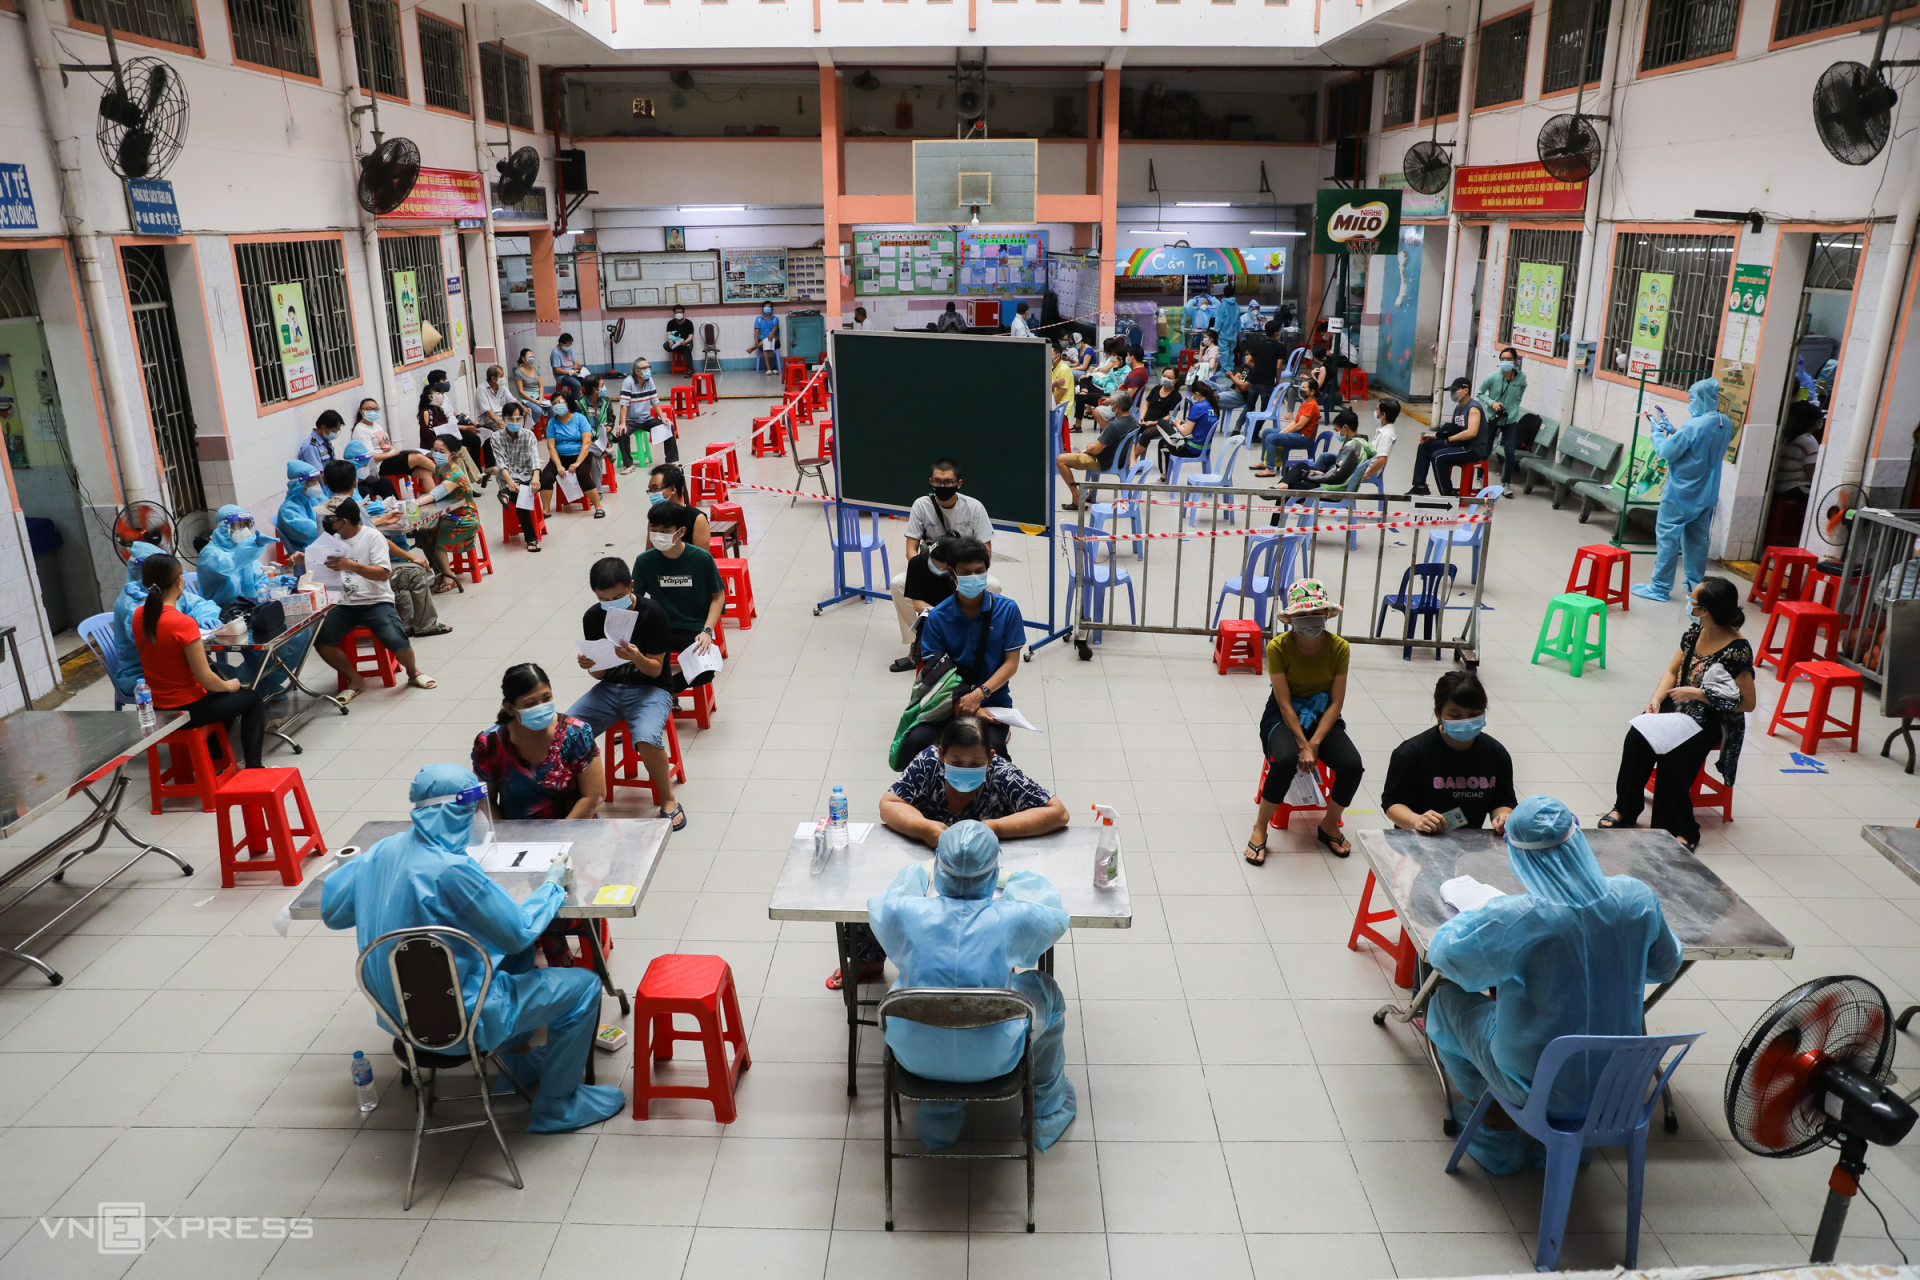 Vietnam News Today (August 4): Shippers in Ho Chi Minh City Receive Covid Vaccine Jab